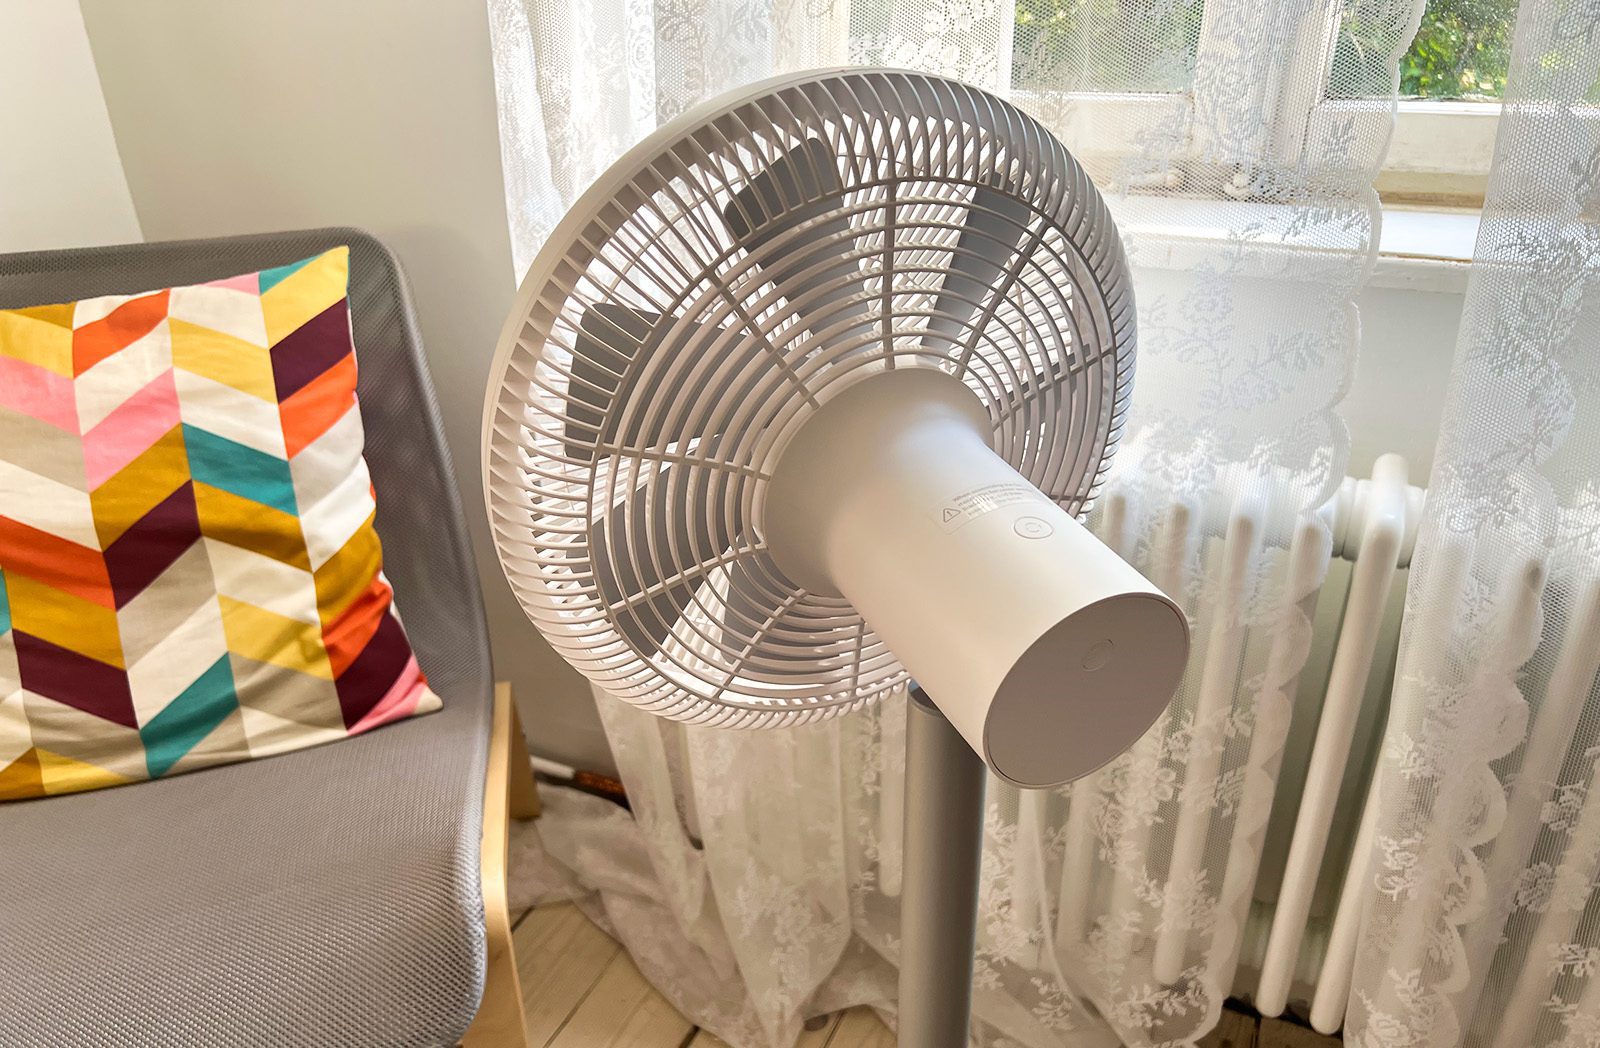 The Smartmi Standing Fan 3 has a clean finish, offers a number of features, the app is easy to use and it's quiet - what more could you ask for?